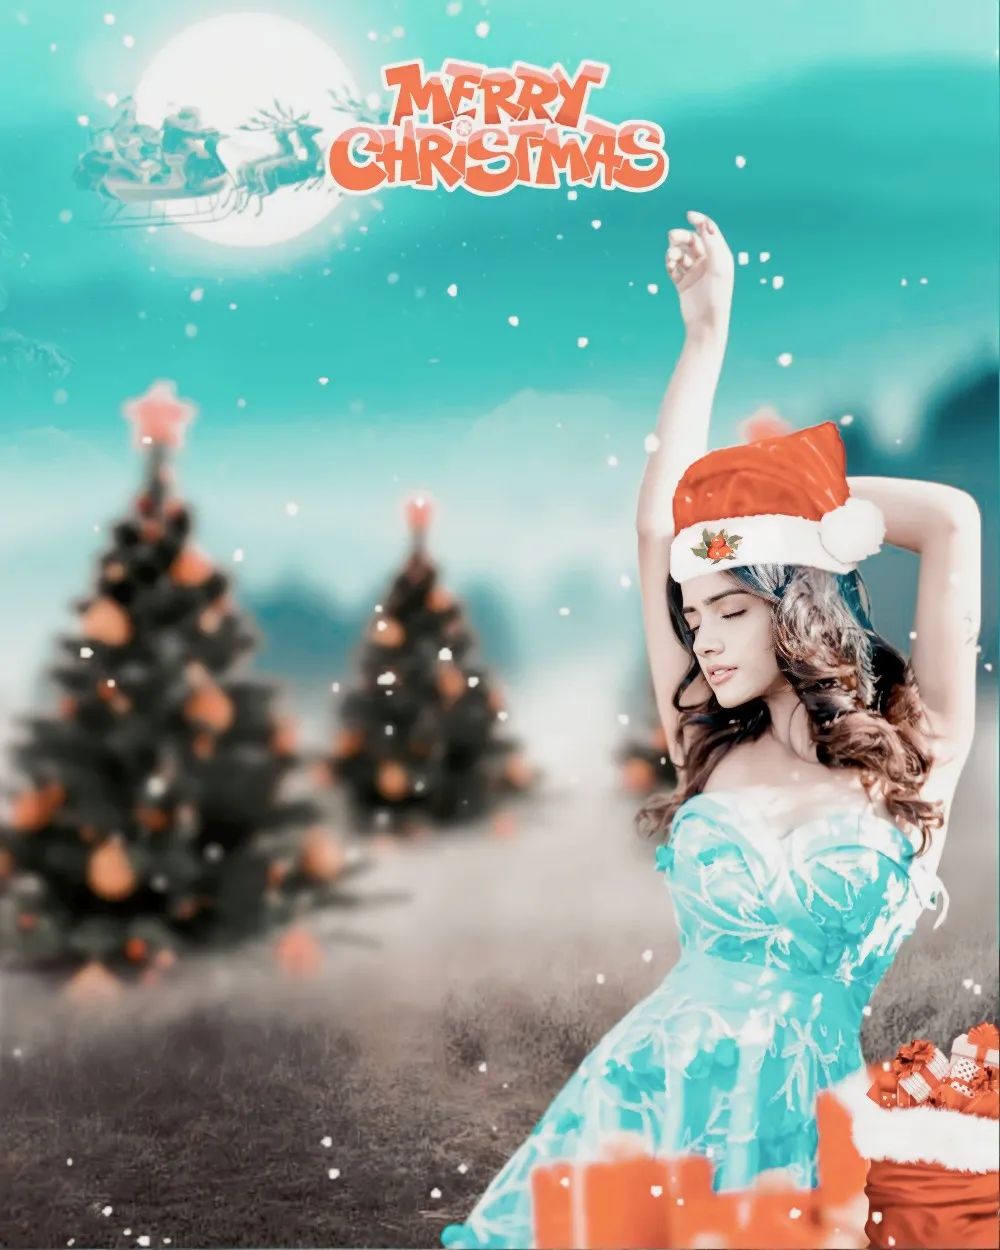 You are currently viewing Merry Christmas background for photo editing download free